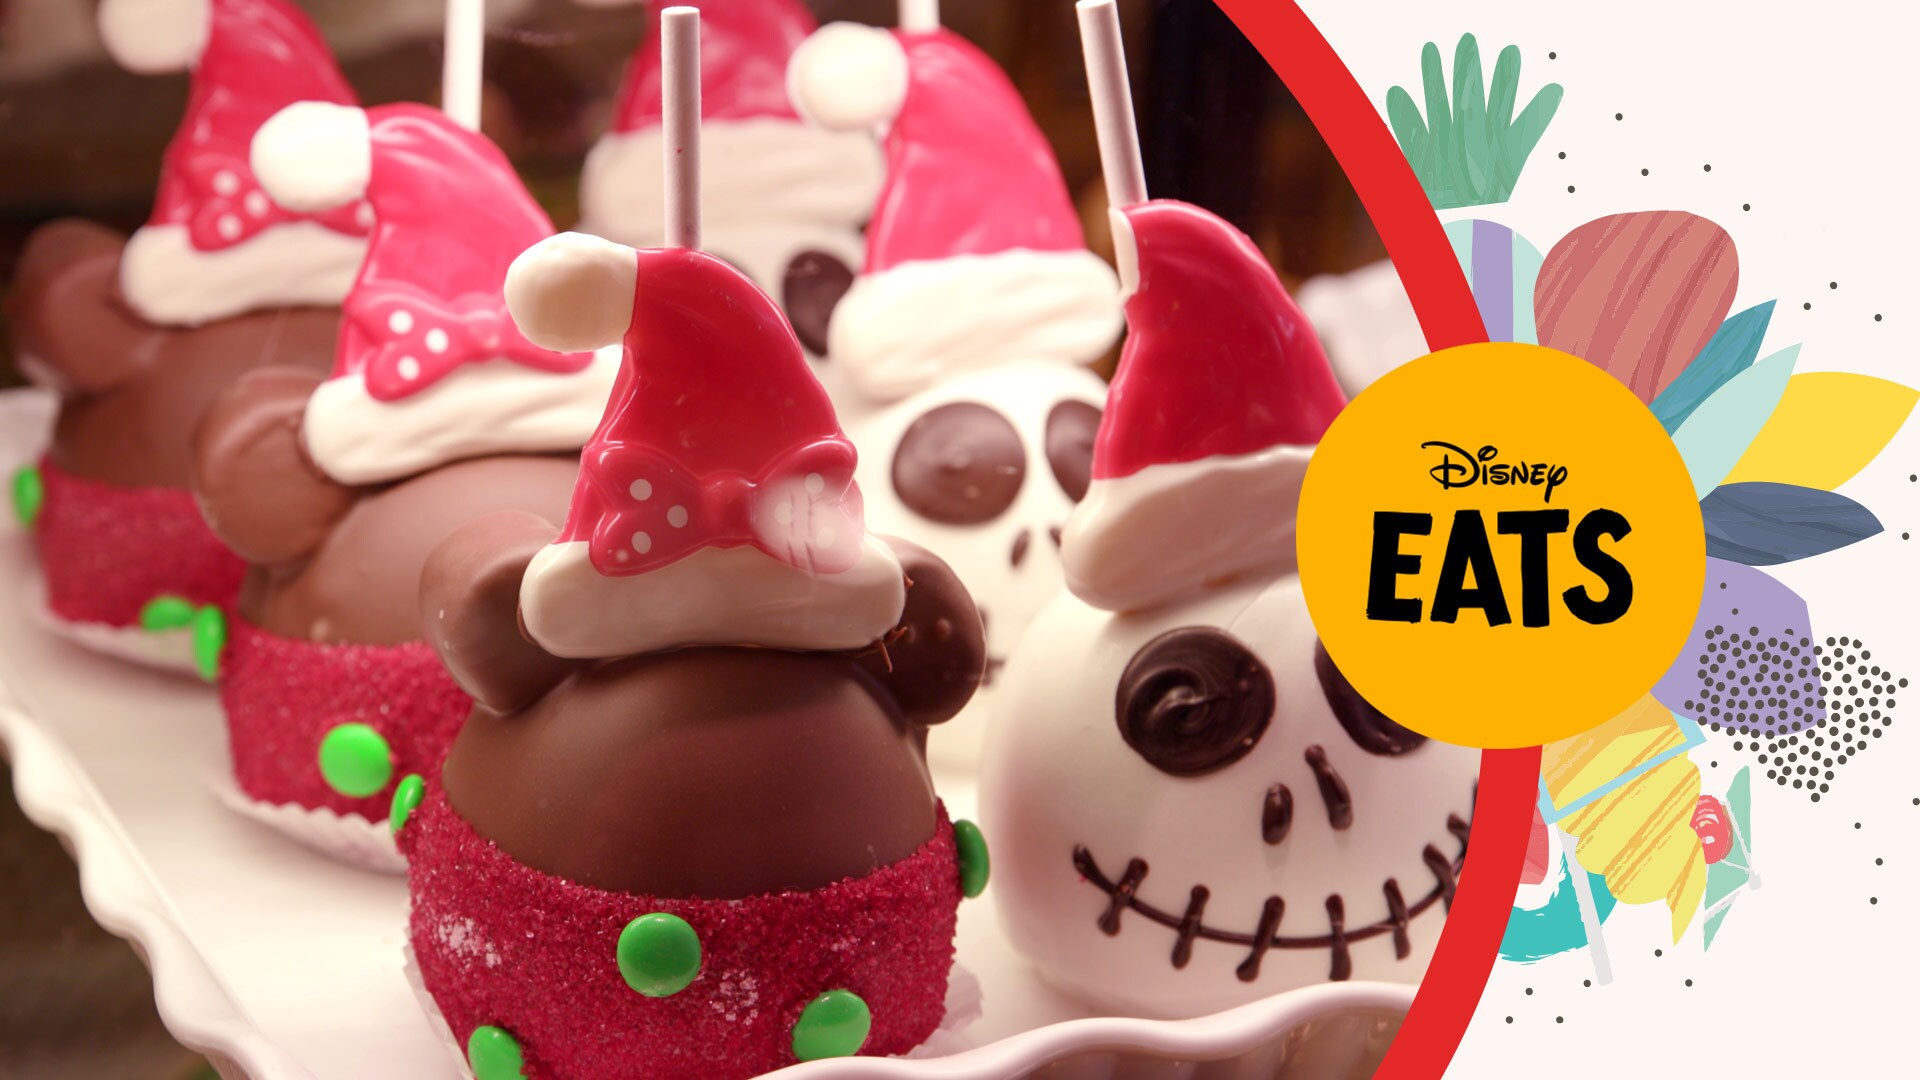 All Of The Festive Food and Treats During Holiday Time at the Disneyland Resort | Disney Eats